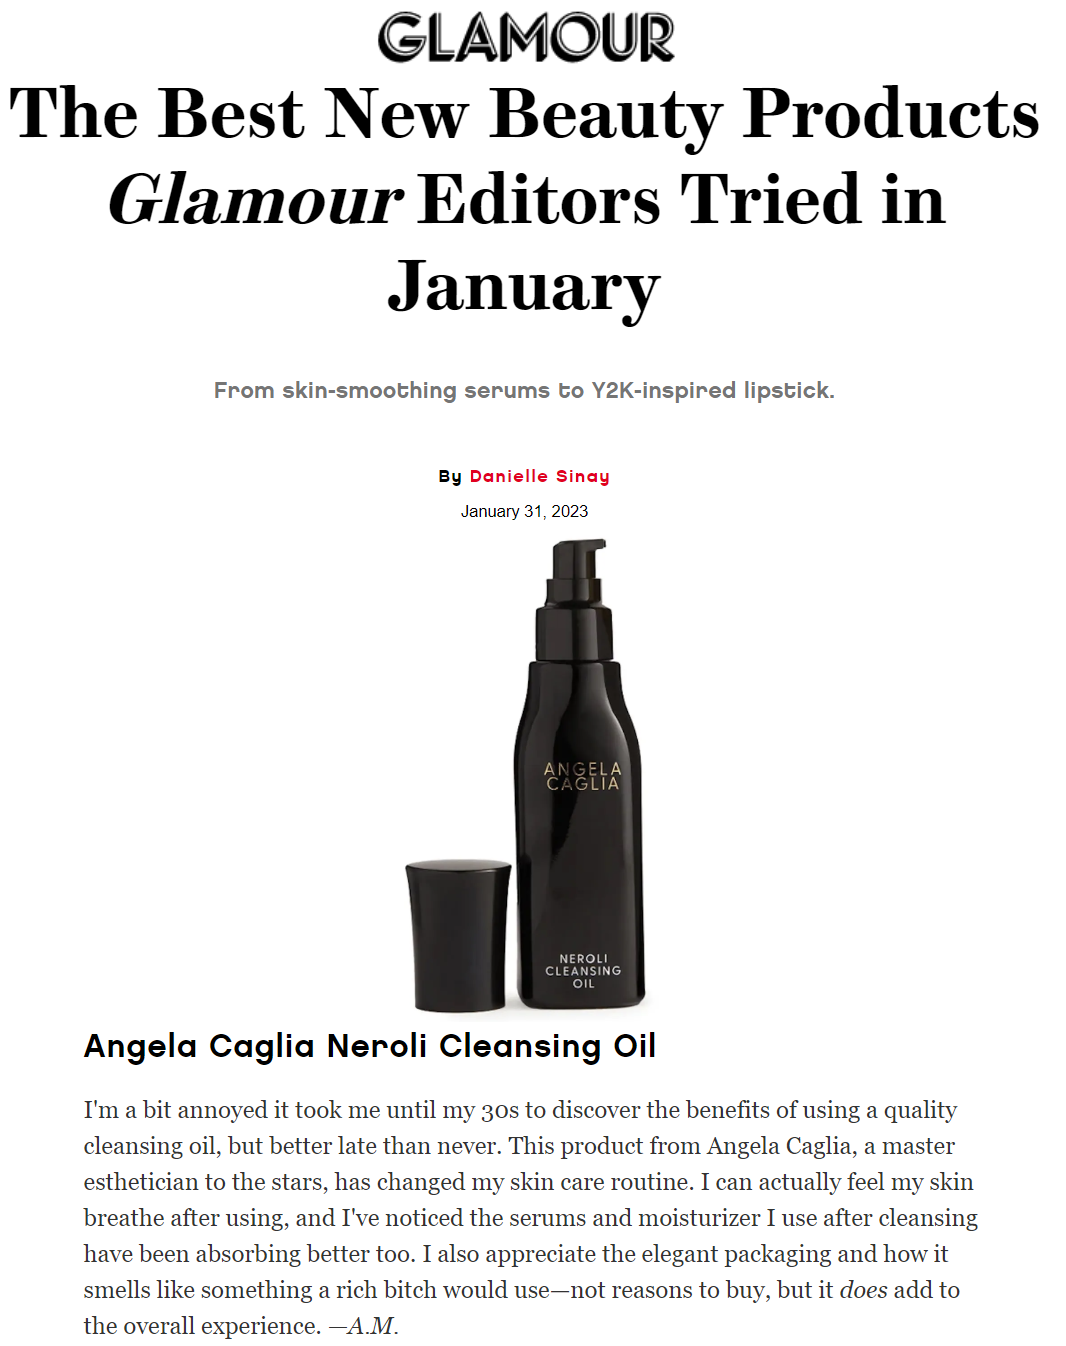 Glamour Magazine Best New Beauty Products Neroli Cleansing Oil.